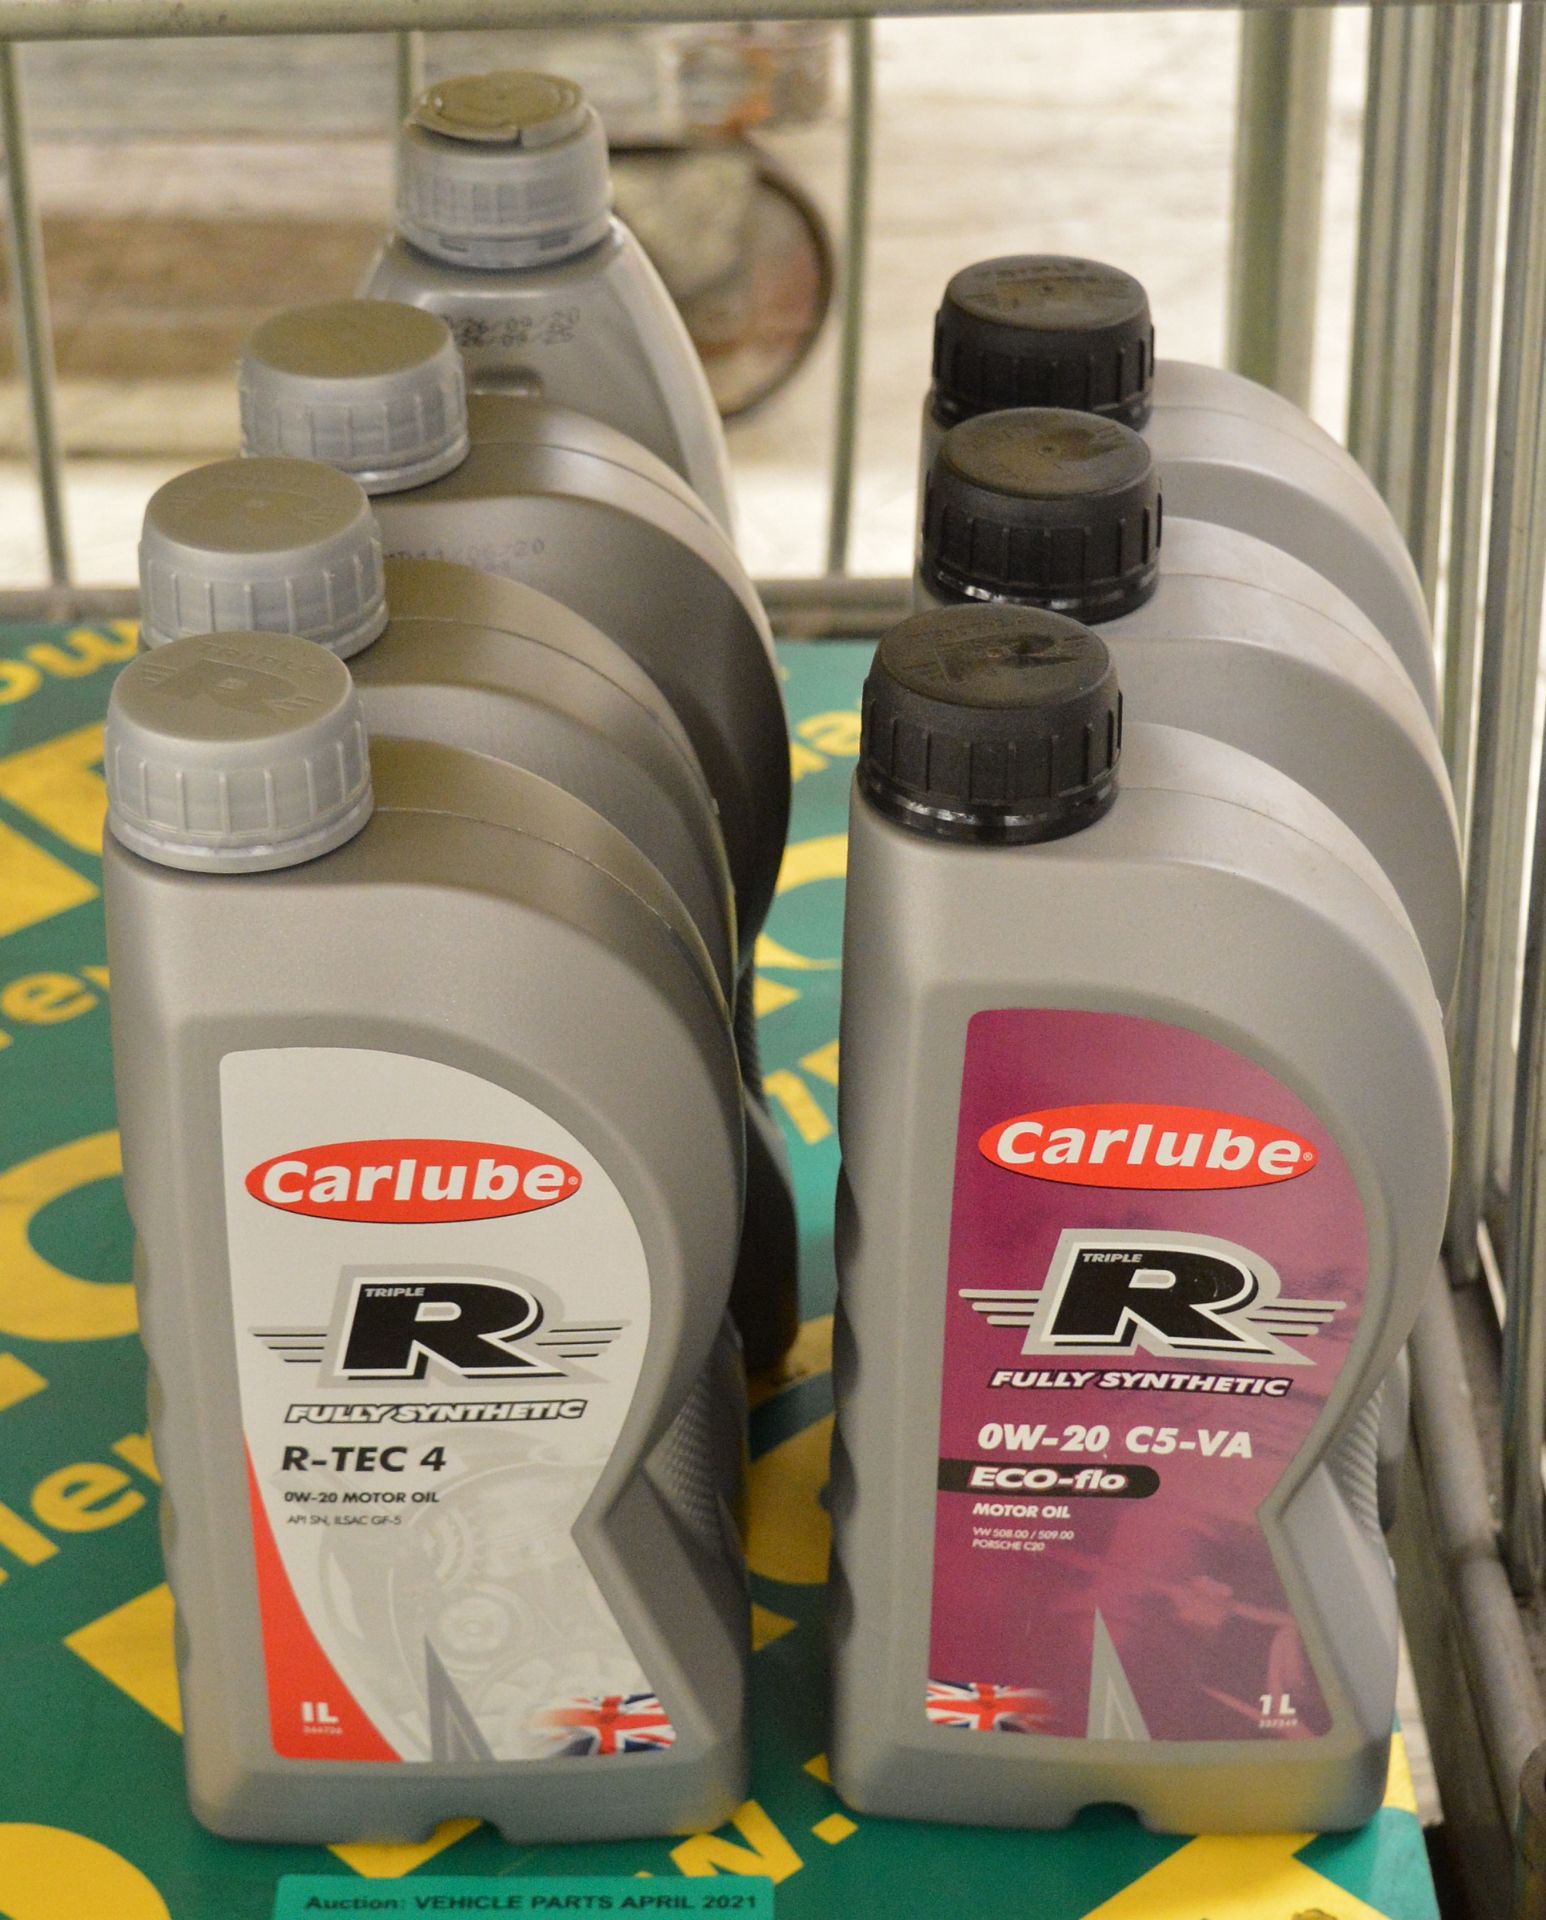 3x Carlube fully synthetic Motor Oil 0W-20 C5-VA, 1x R-Tec 4 & more. Other oils in the description